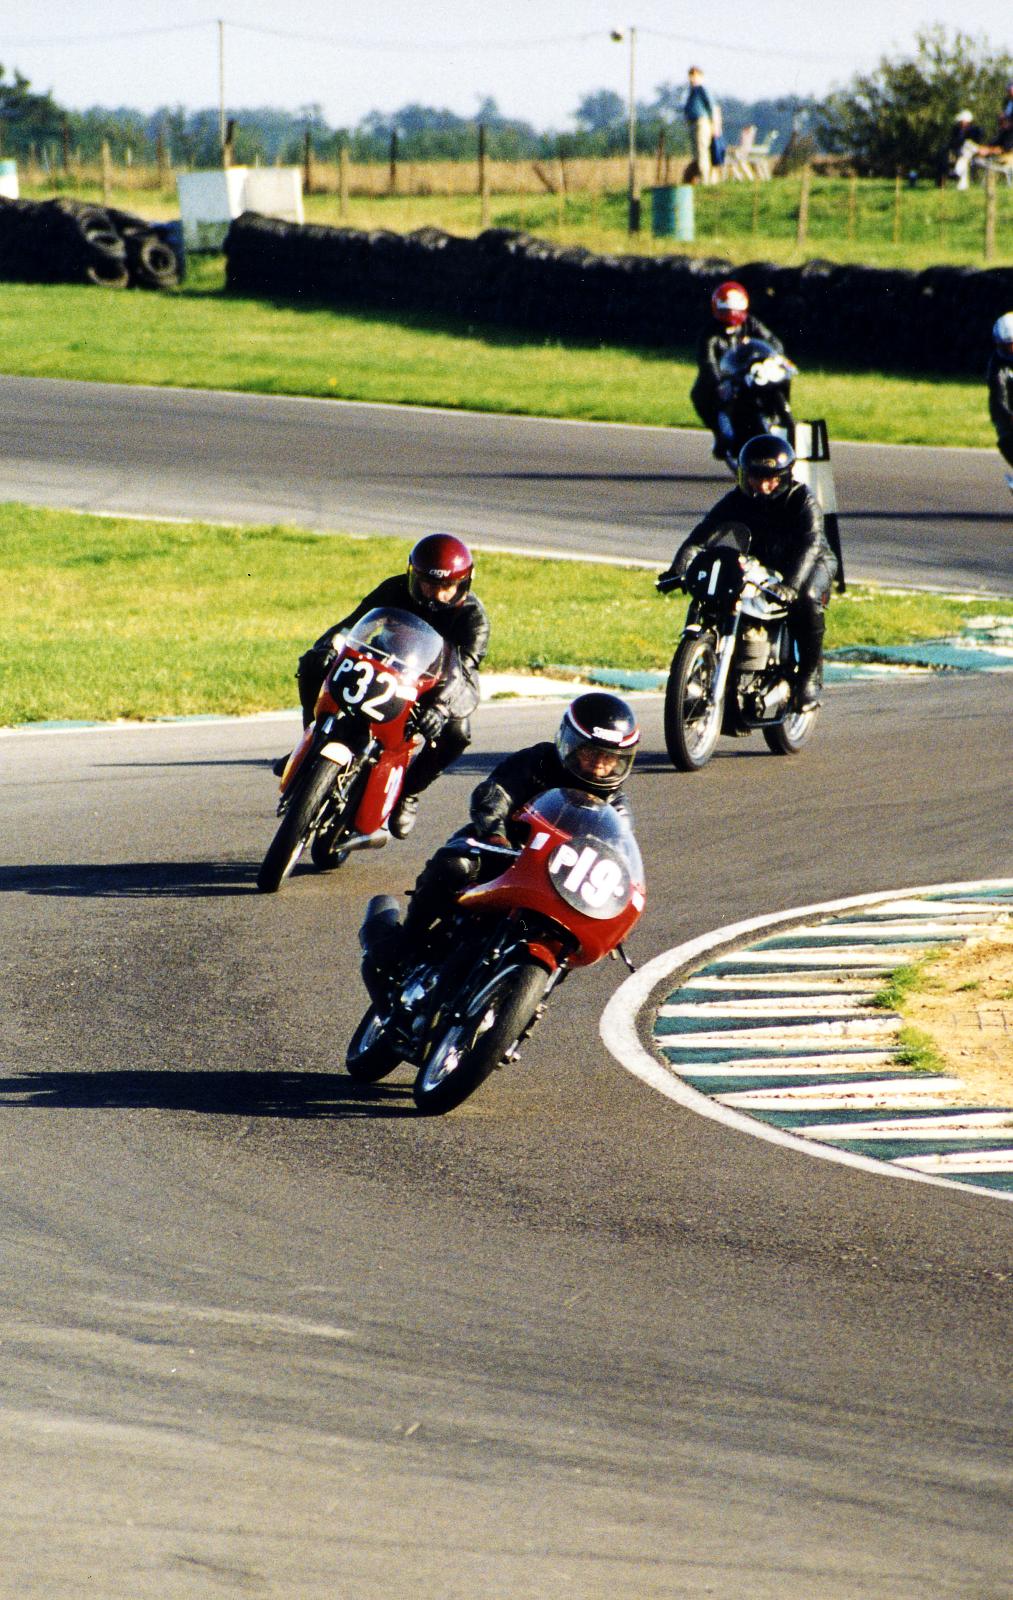 a group of people racing motorcycles on a track